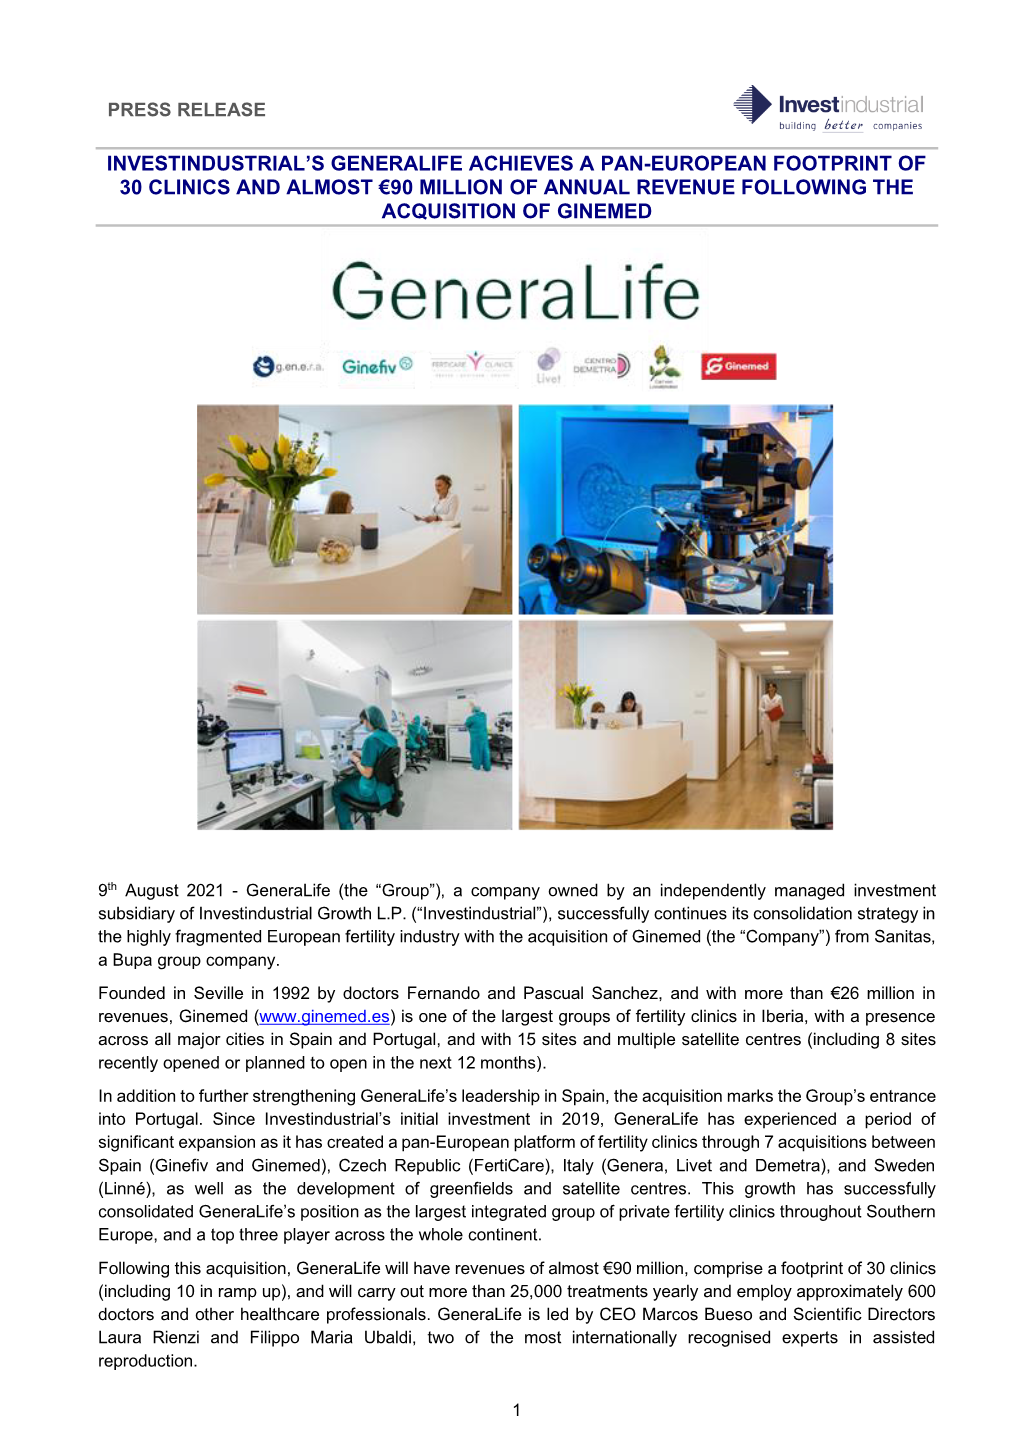 Generalife Acquires Ginemed